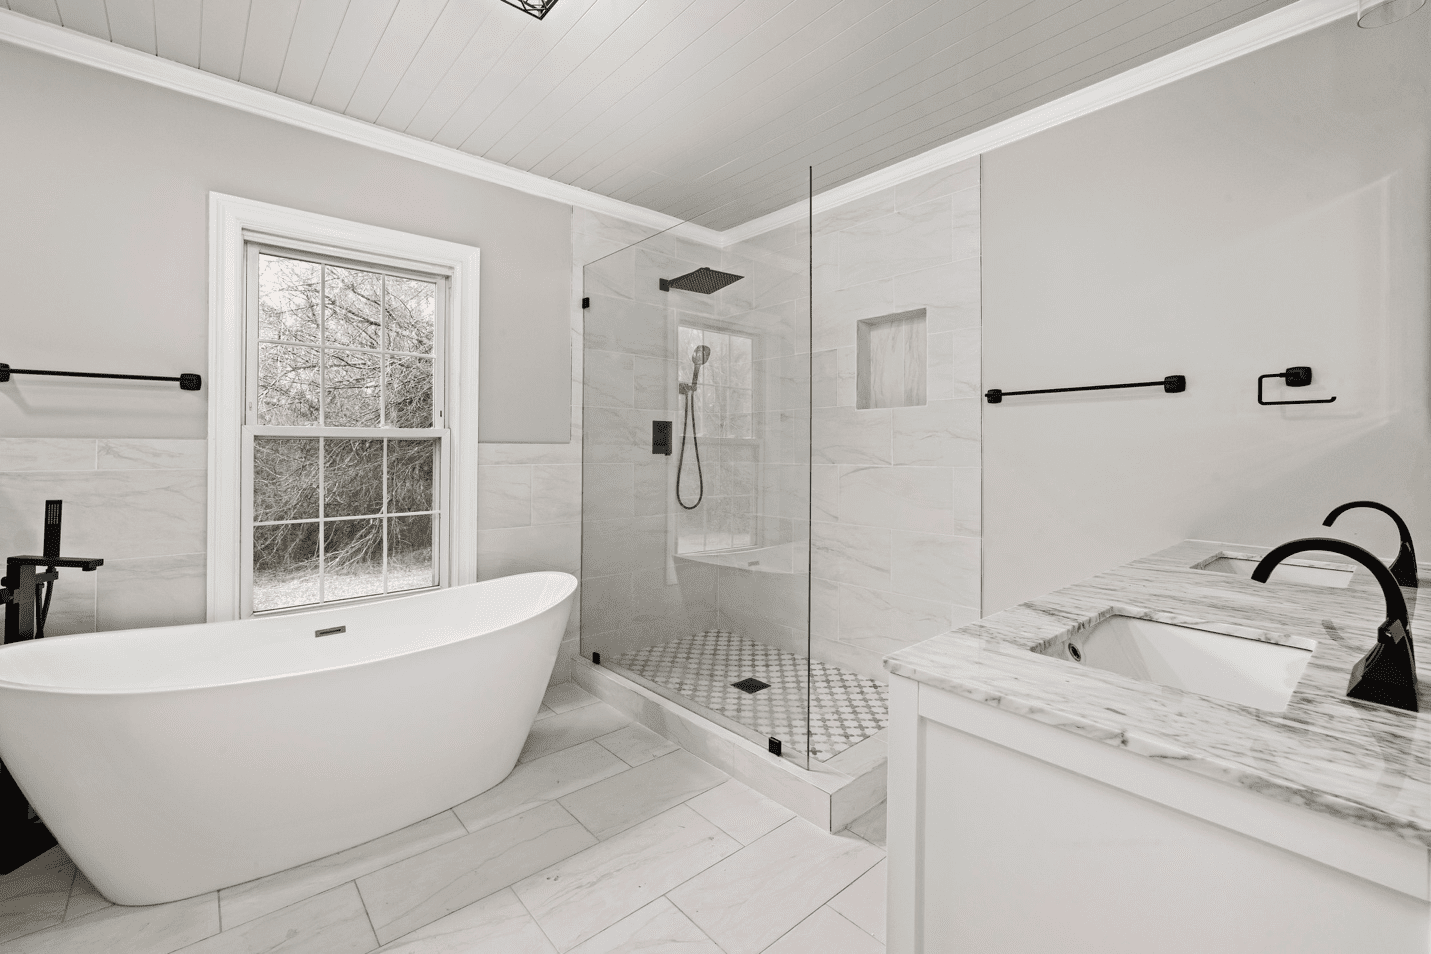 A White Bathroom With Bathtub And Shower Cubicle